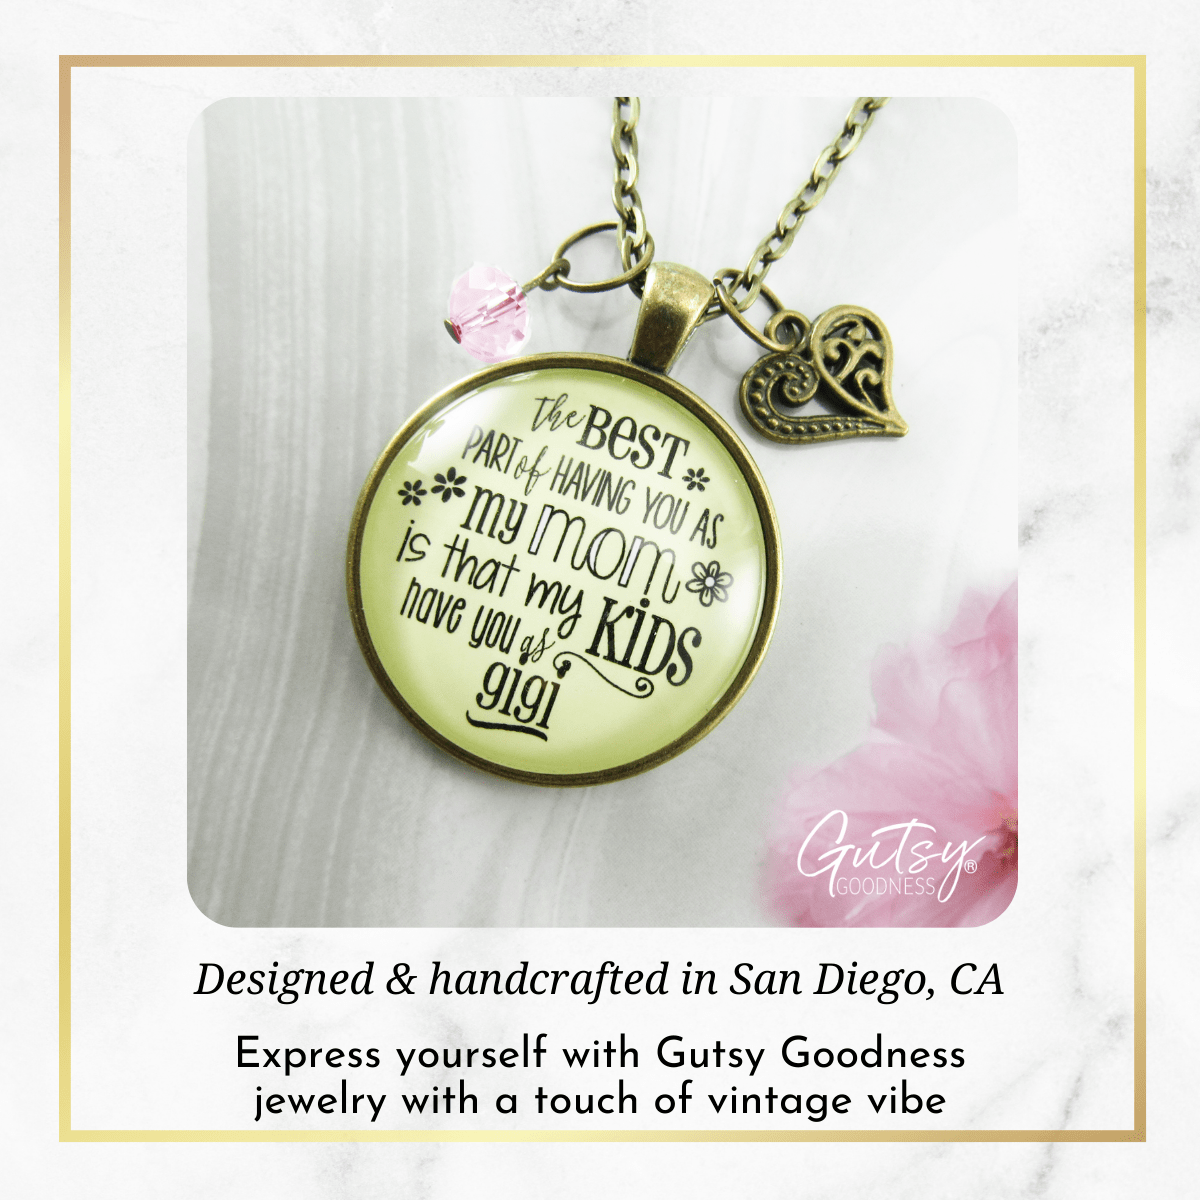 Gutsy Goodness Mimi Necklace Best Part You as Mom Kids Grandma Jewelry Gift Daughter - Gutsy Goodness Handmade Jewelry;Mimi Necklace Best Part You As Mom Kids Grandma Jewelry Gift Daughter - Gutsy Goodness Handmade Jewelry Gifts